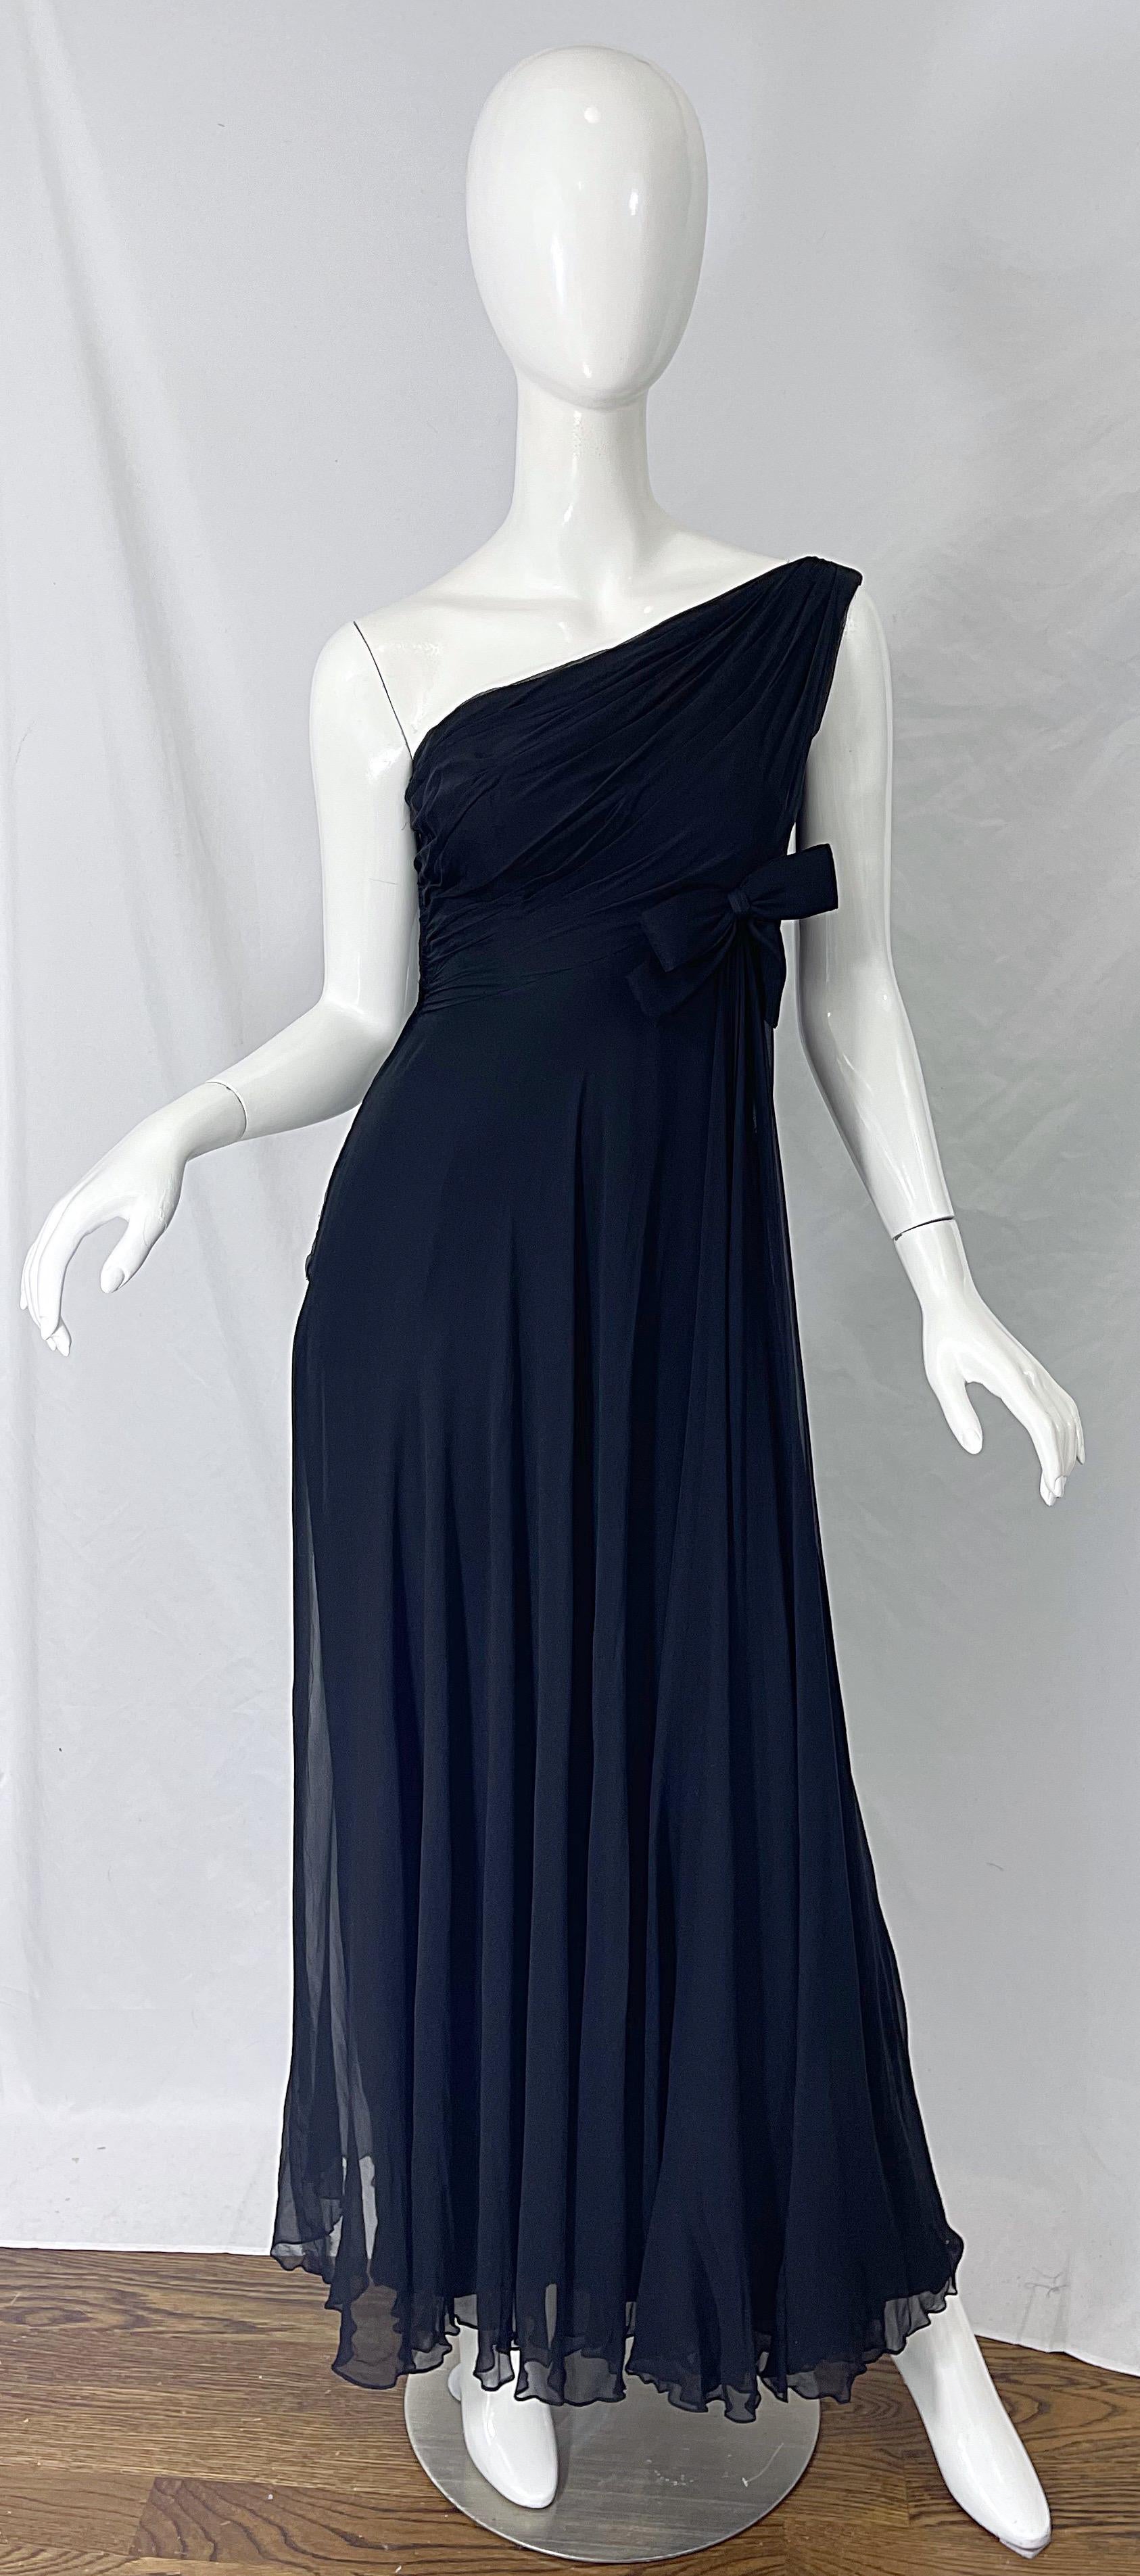 Malcolm Starr 1960s Black Silk Chiffon Grecian One Shoulder Vintage 60s Gown For Sale 10